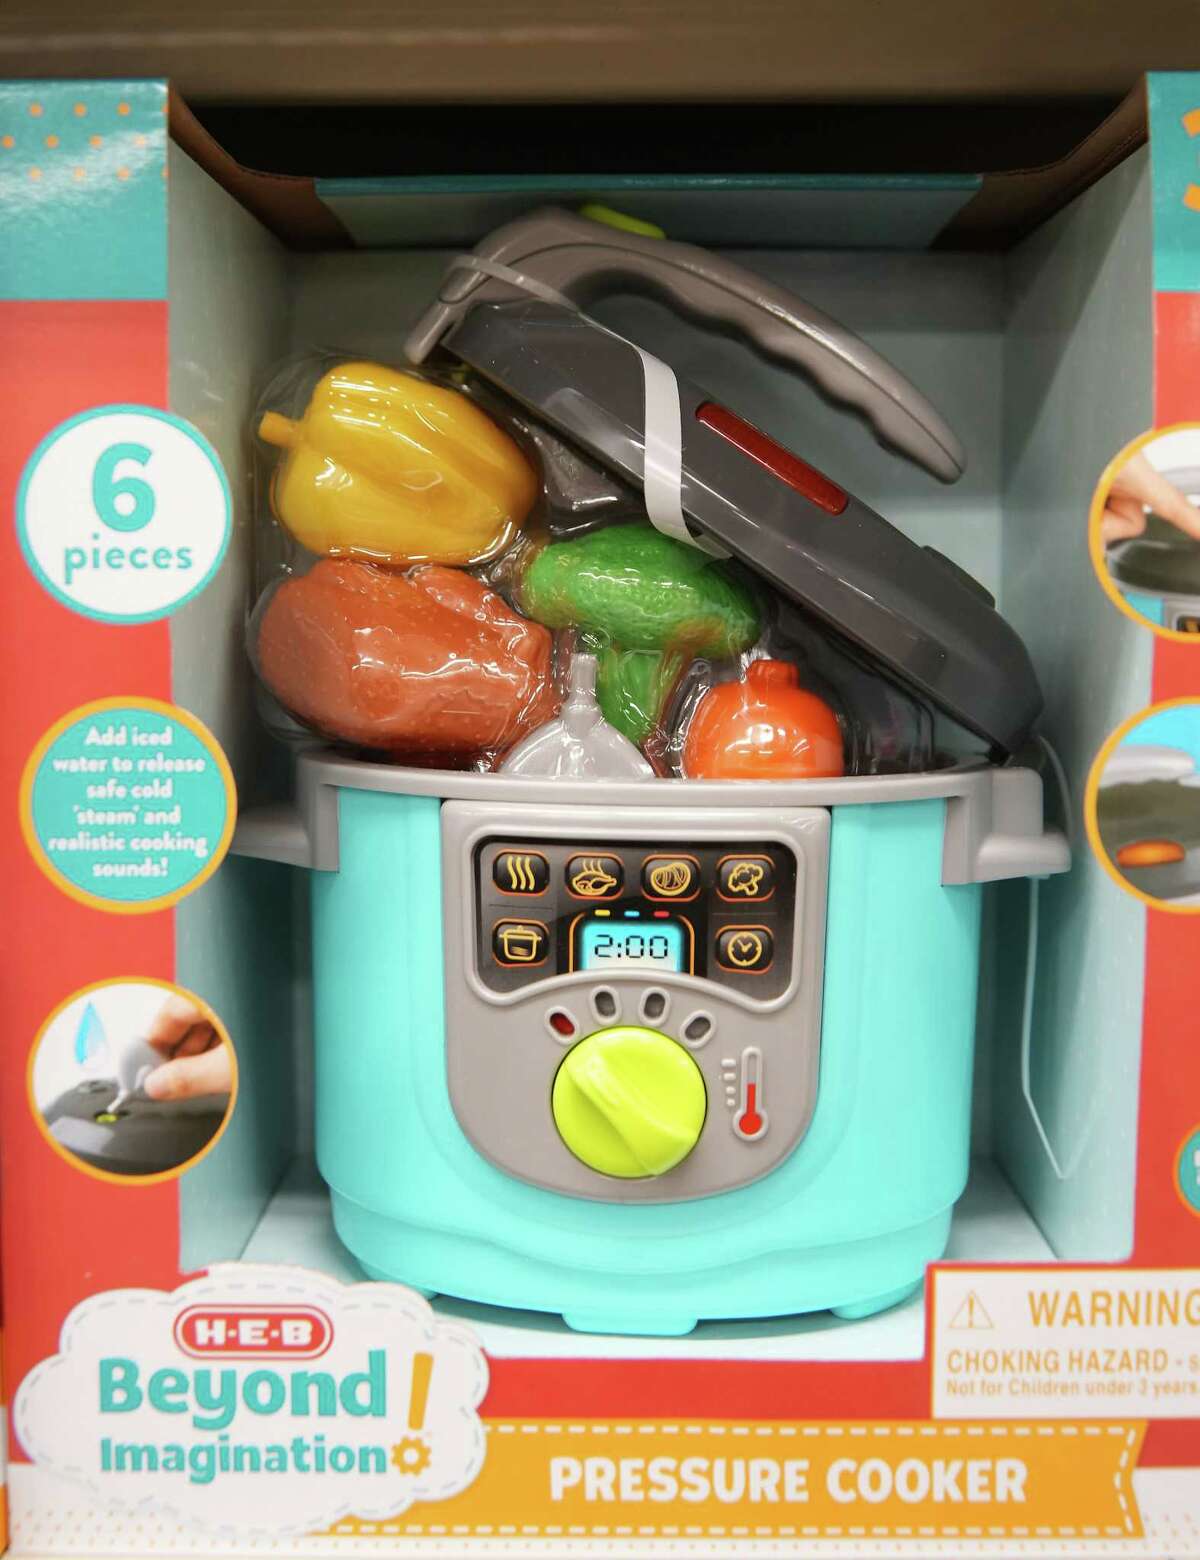 A variety of kitchen and household-goods themed toys, including a pressure cooker, are available in the seasonal aisle.